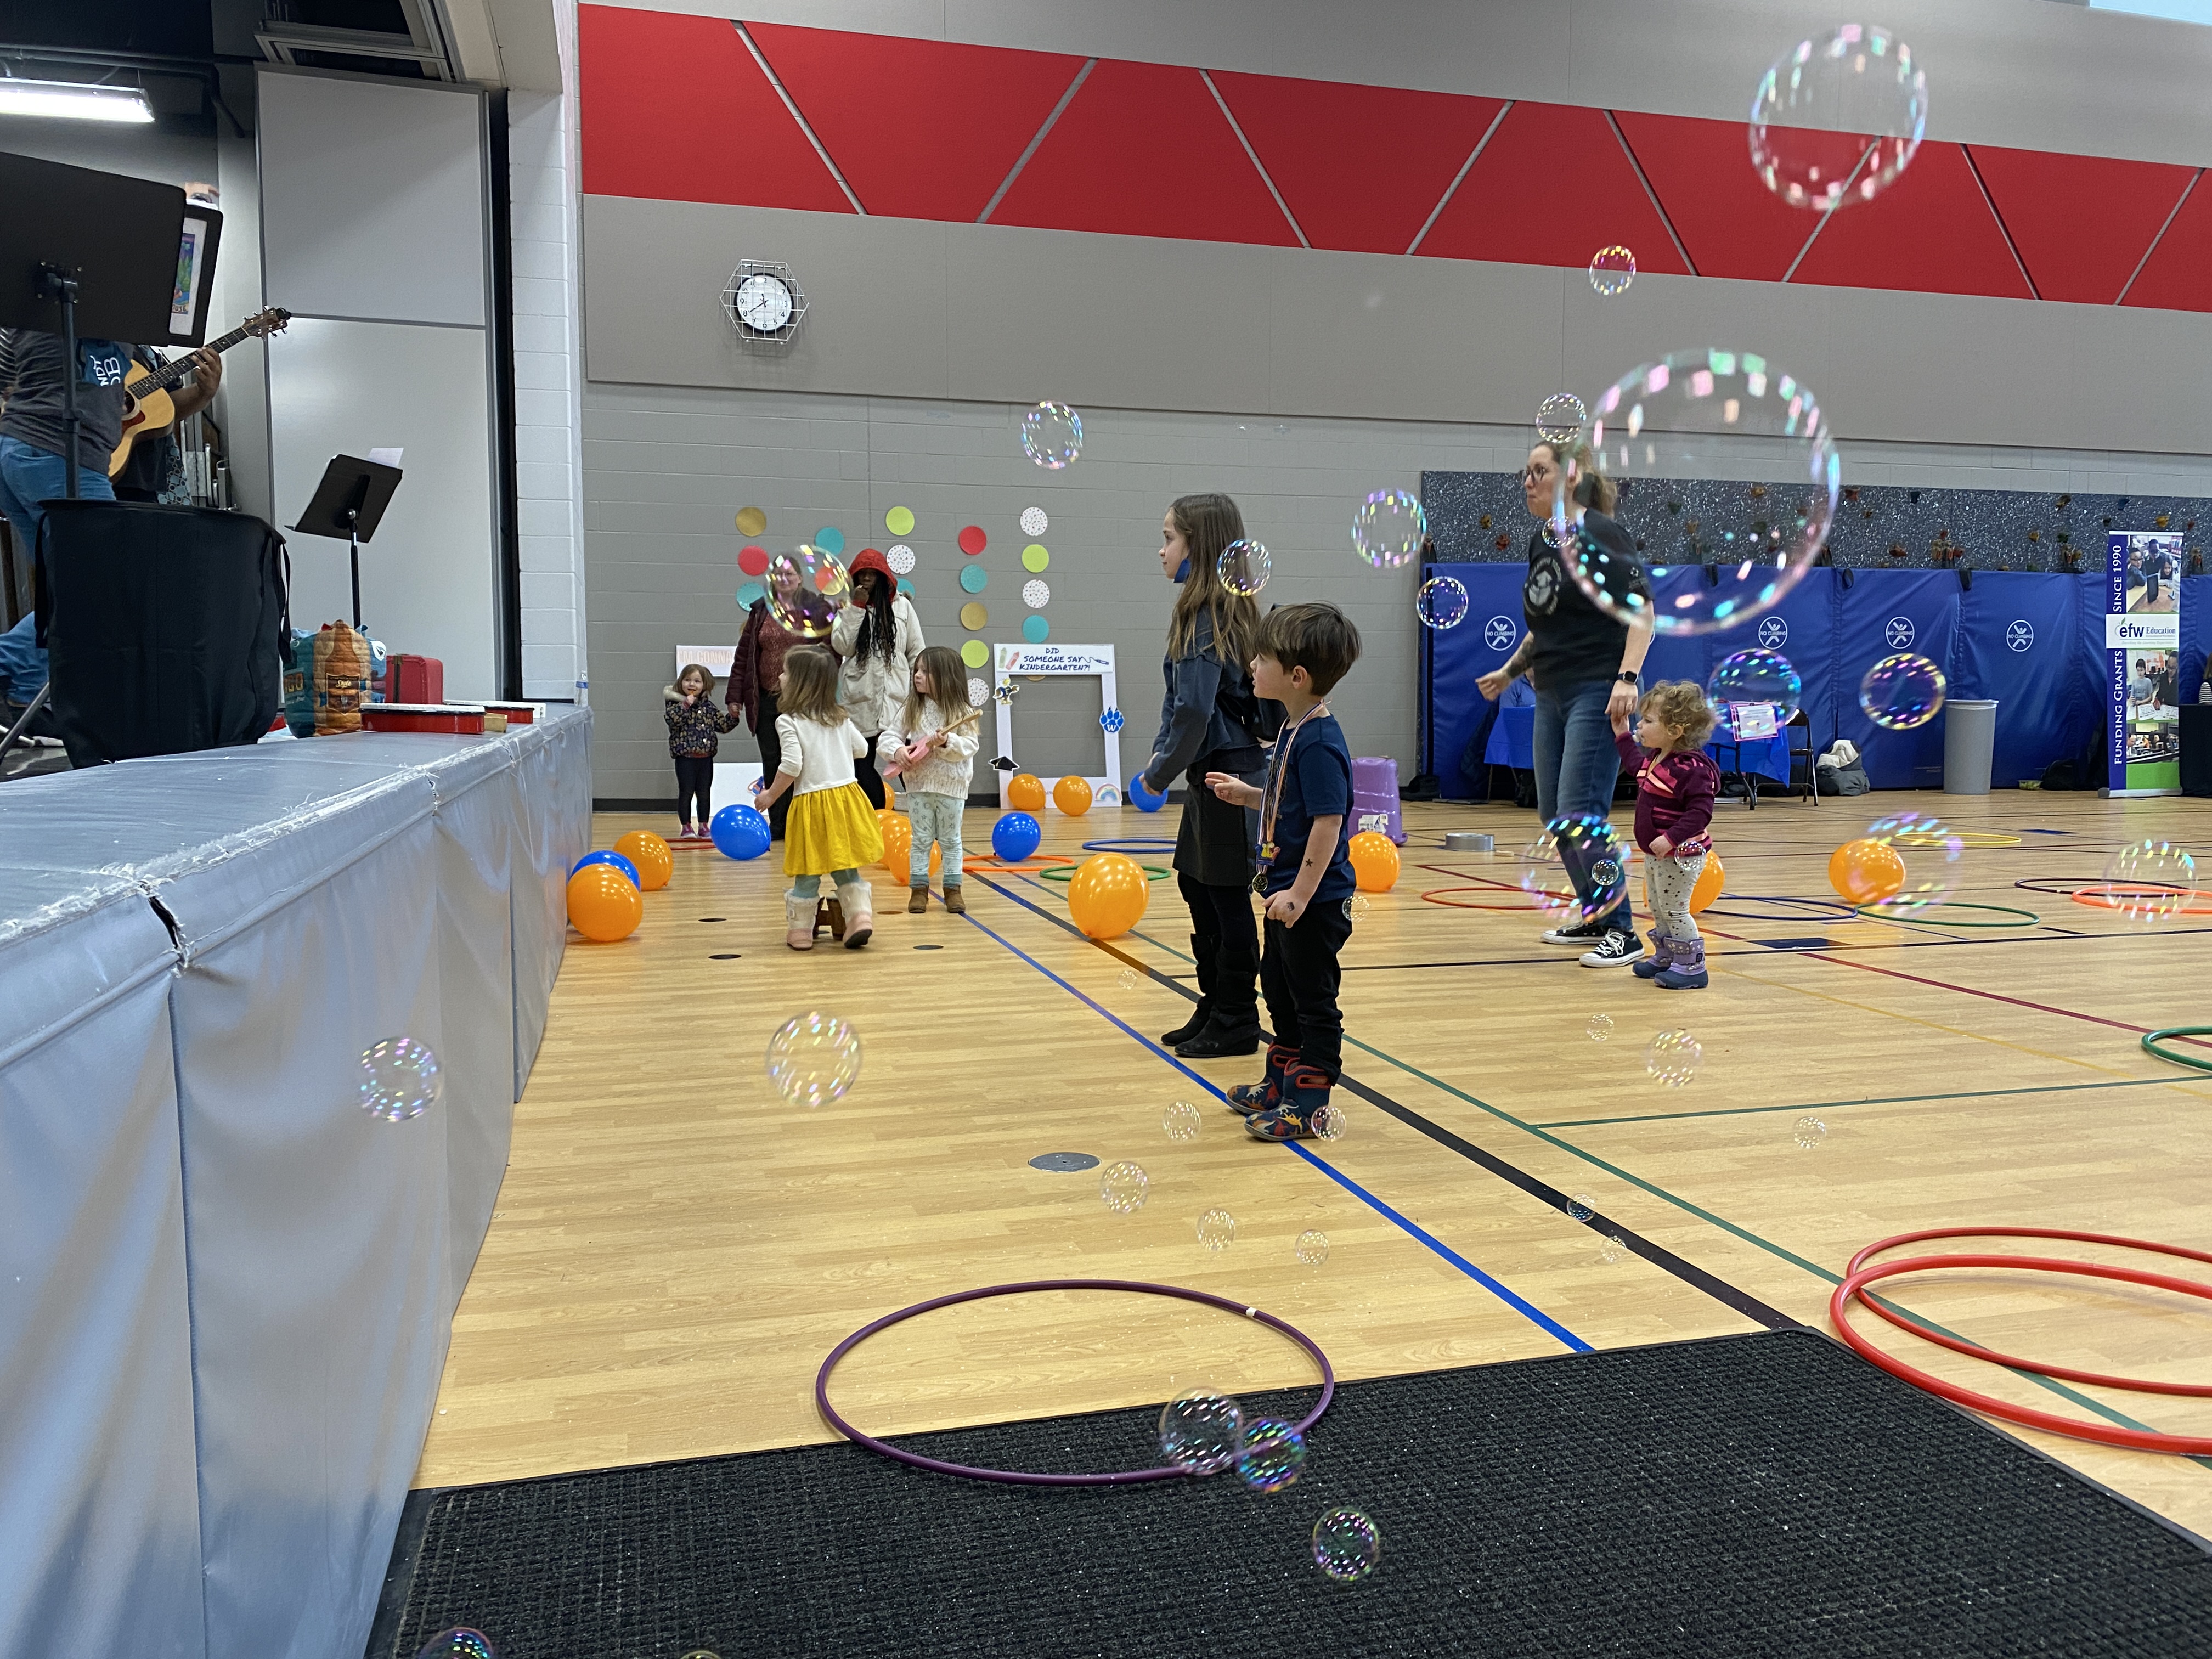 Children in gymnasium with bubbles